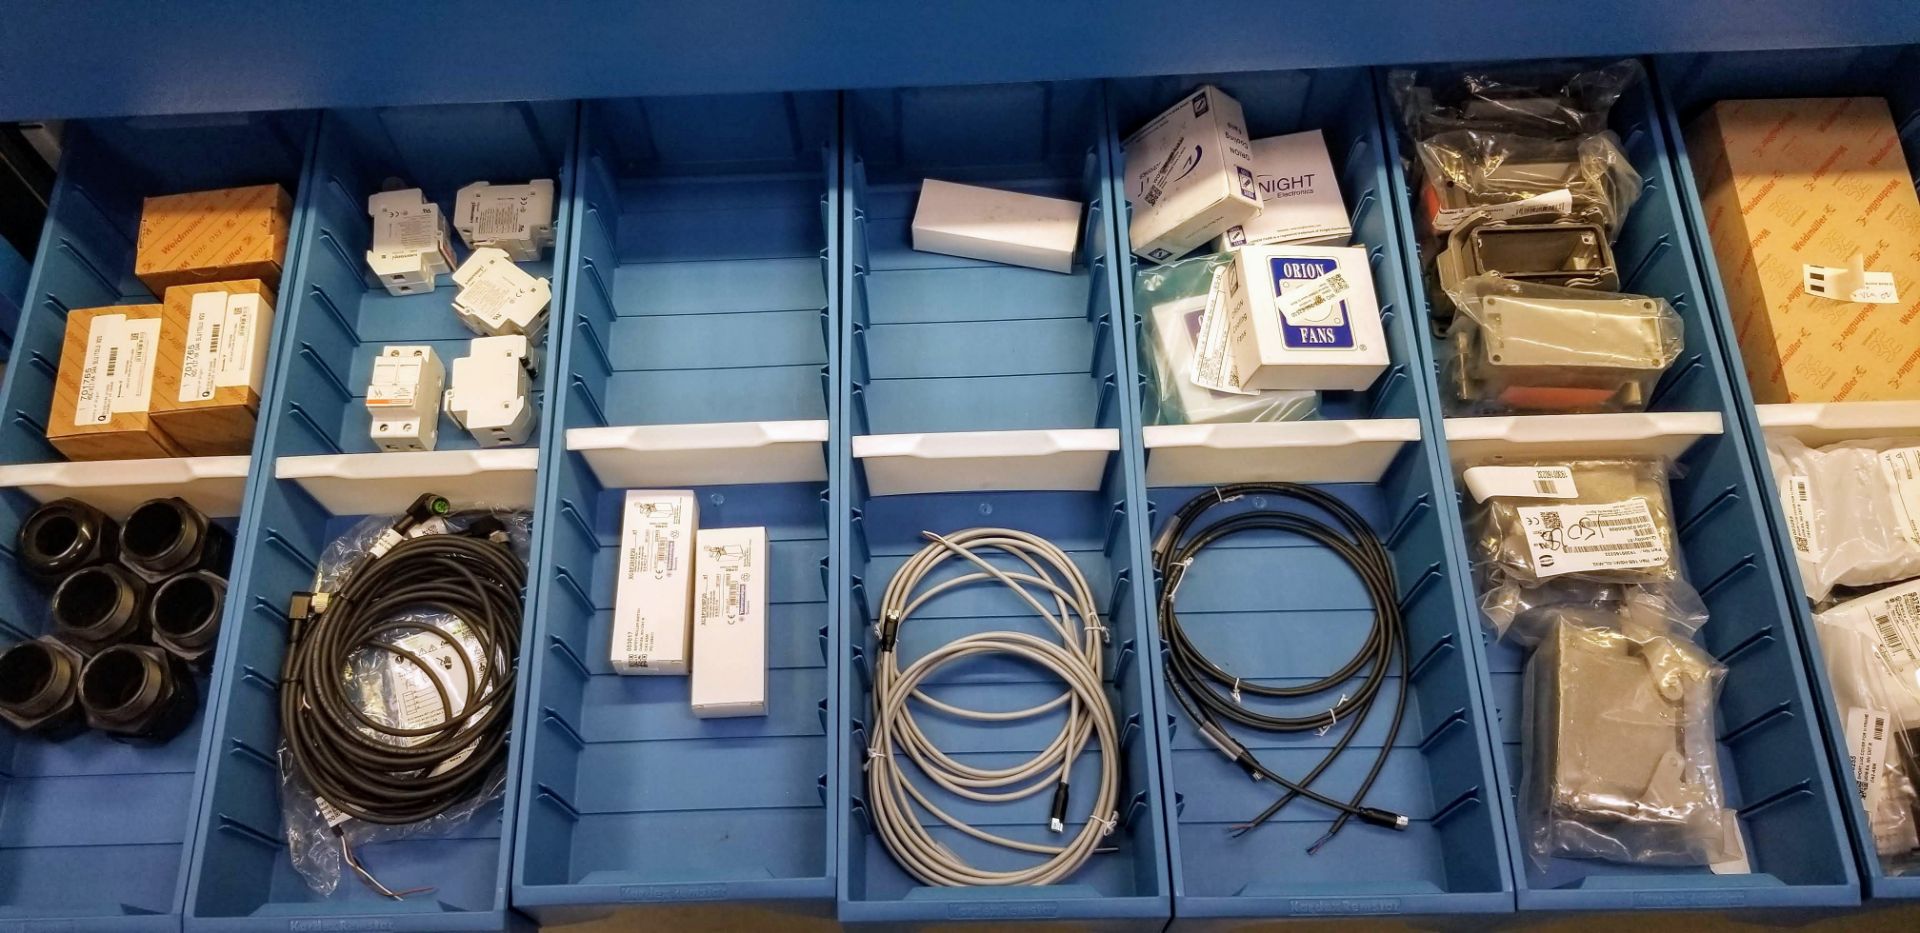 LOT - CONTENTS OF 36 SHELVES INCLUDING: MOTOR CABLES, HYBRID CABLES, PLUGS, INPUT CARDS, MODULES, - Image 58 of 100